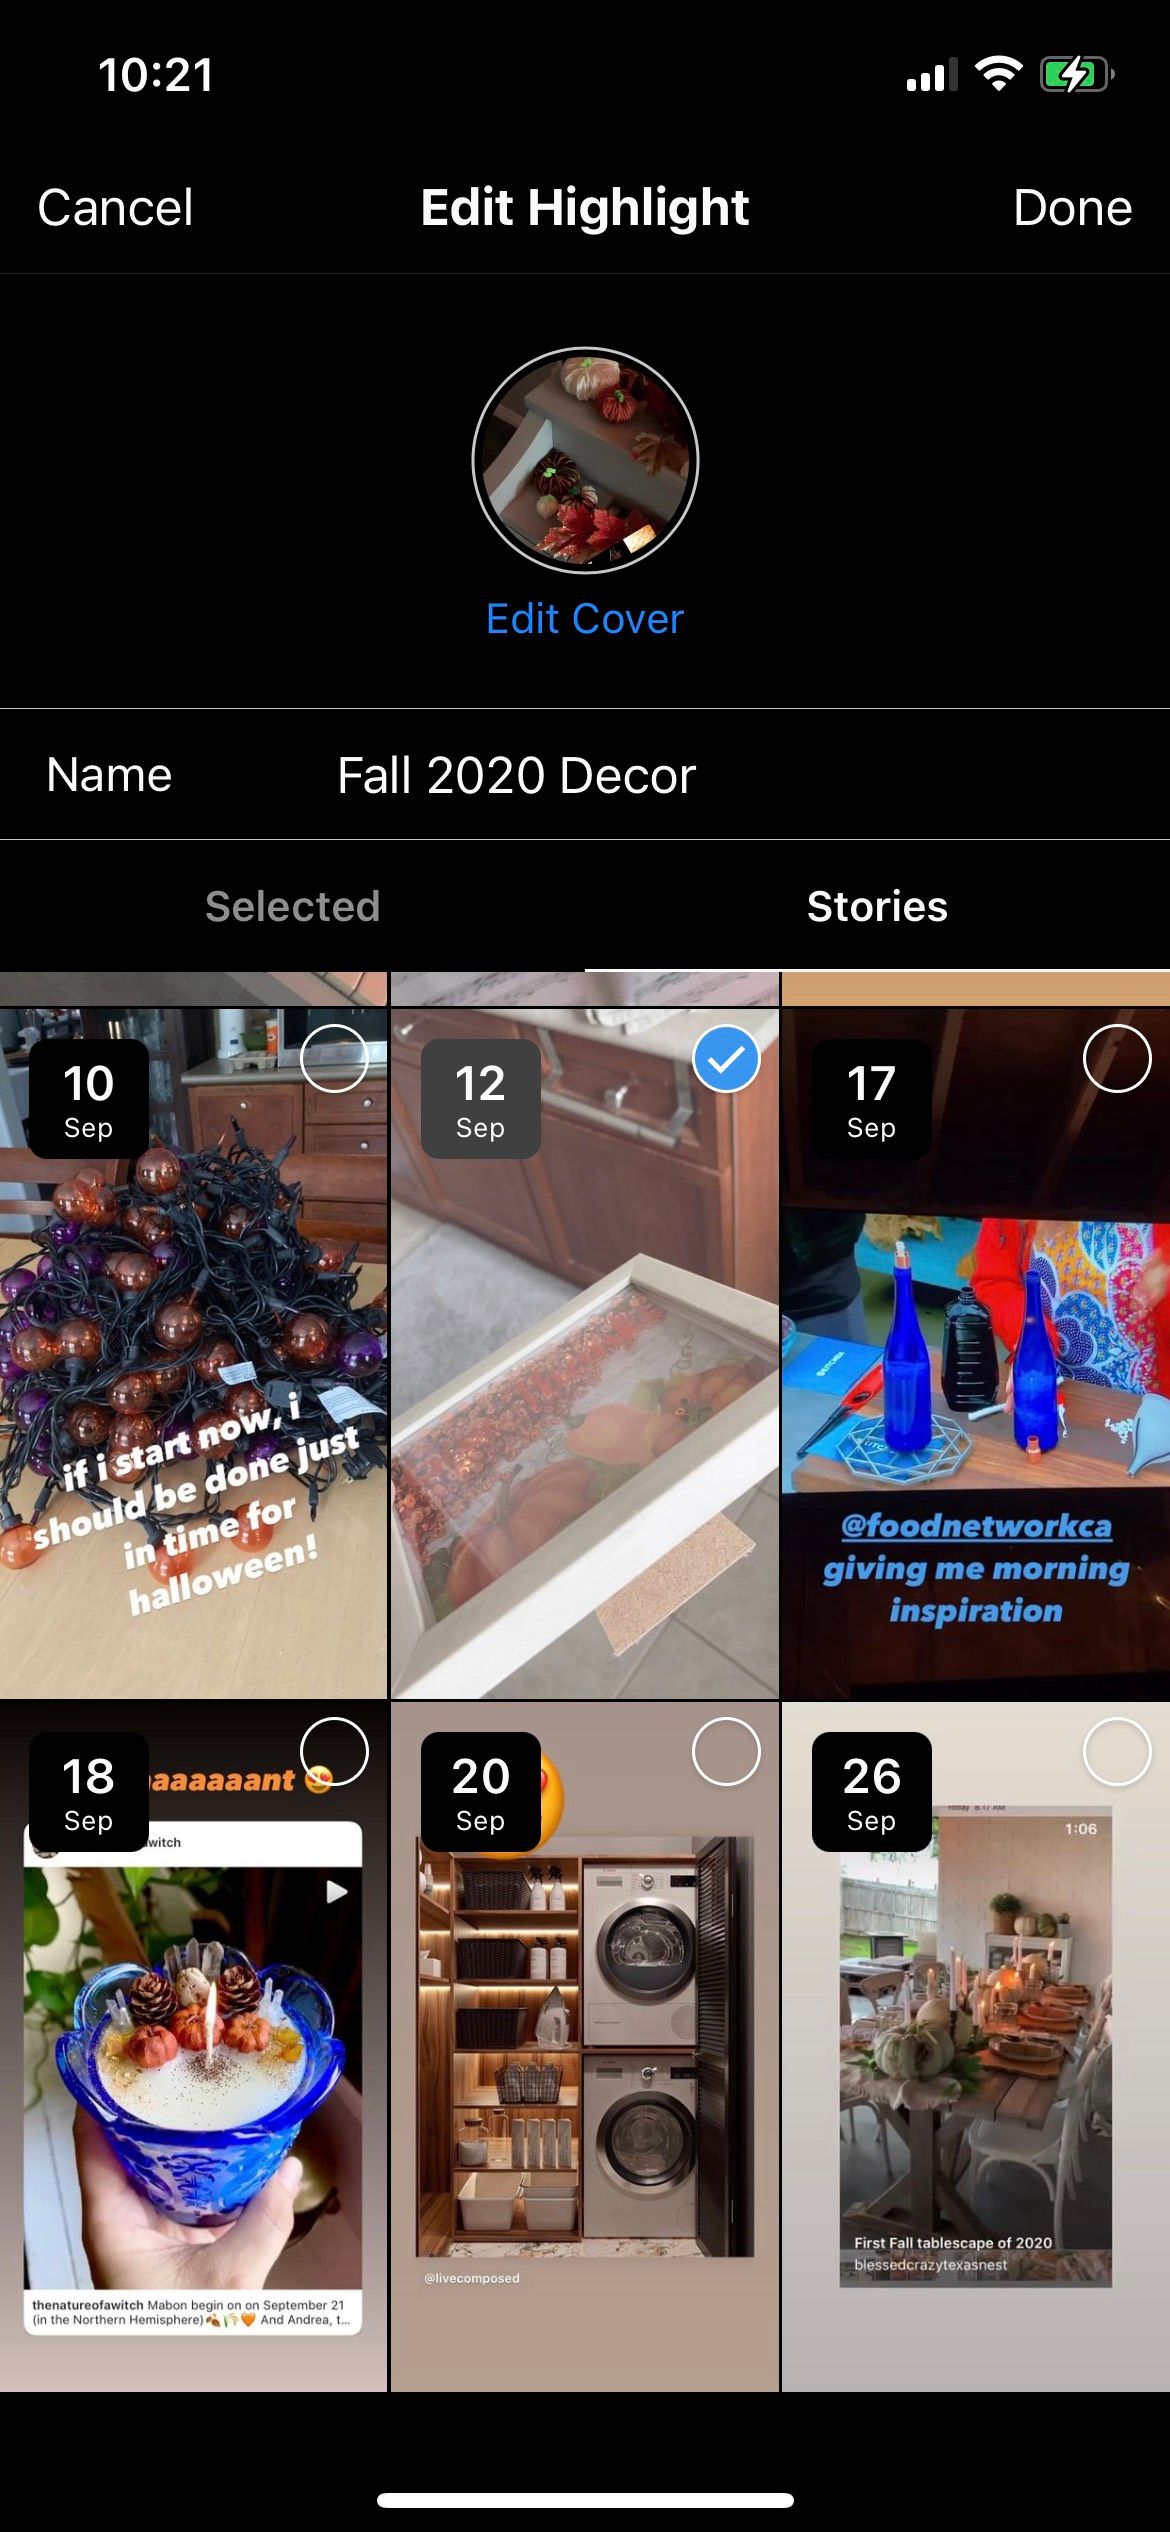 Instagram Story Options Checklist featuring decor options